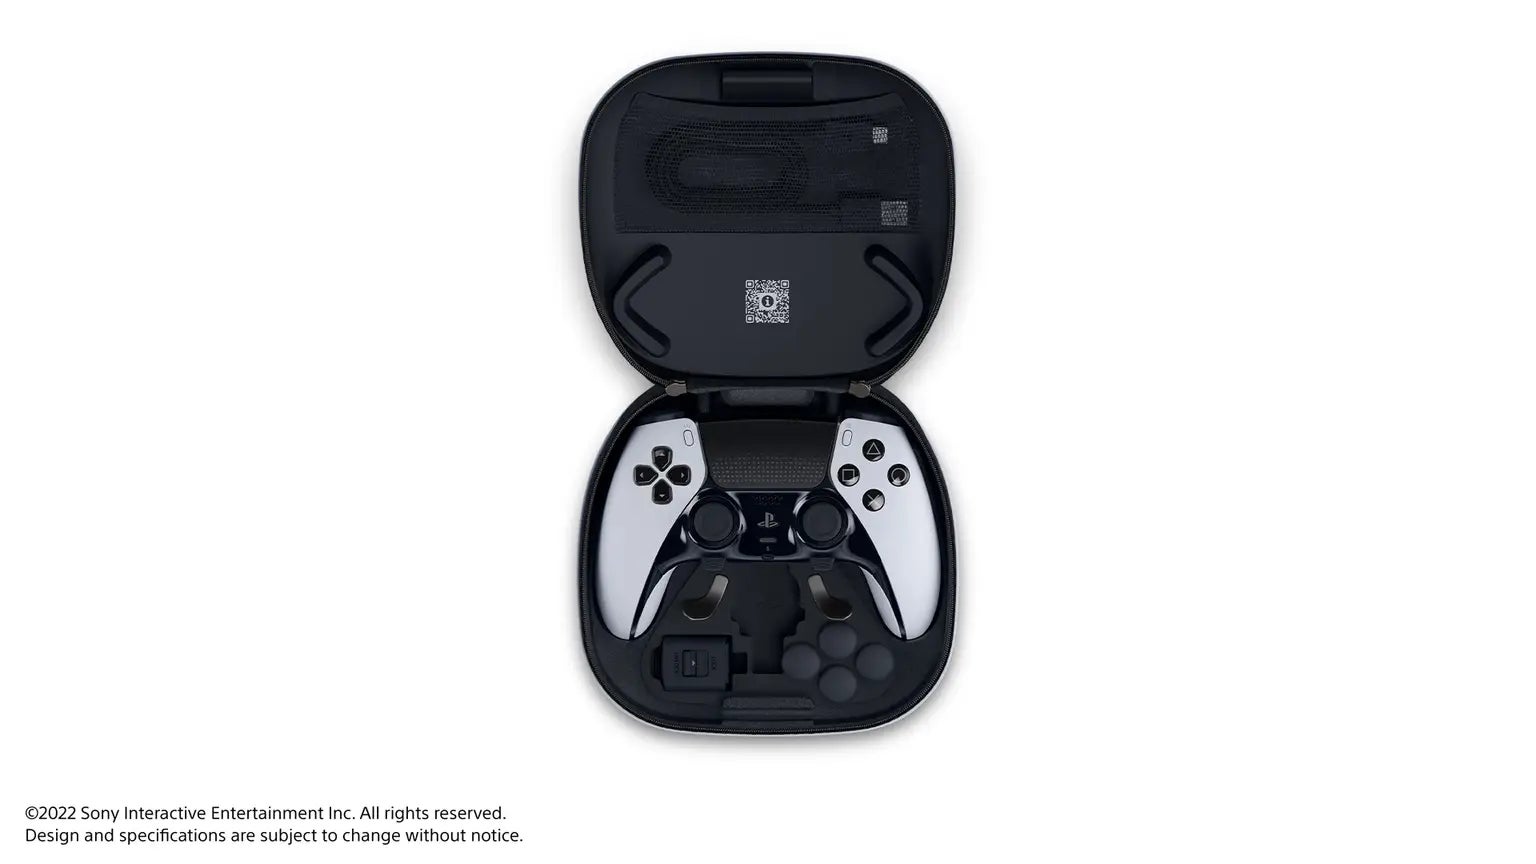 It's unclear what among the new DualSense Edge features makes it worth three times as much as a regular controller. (Image: Sony Interactive Entertainment)